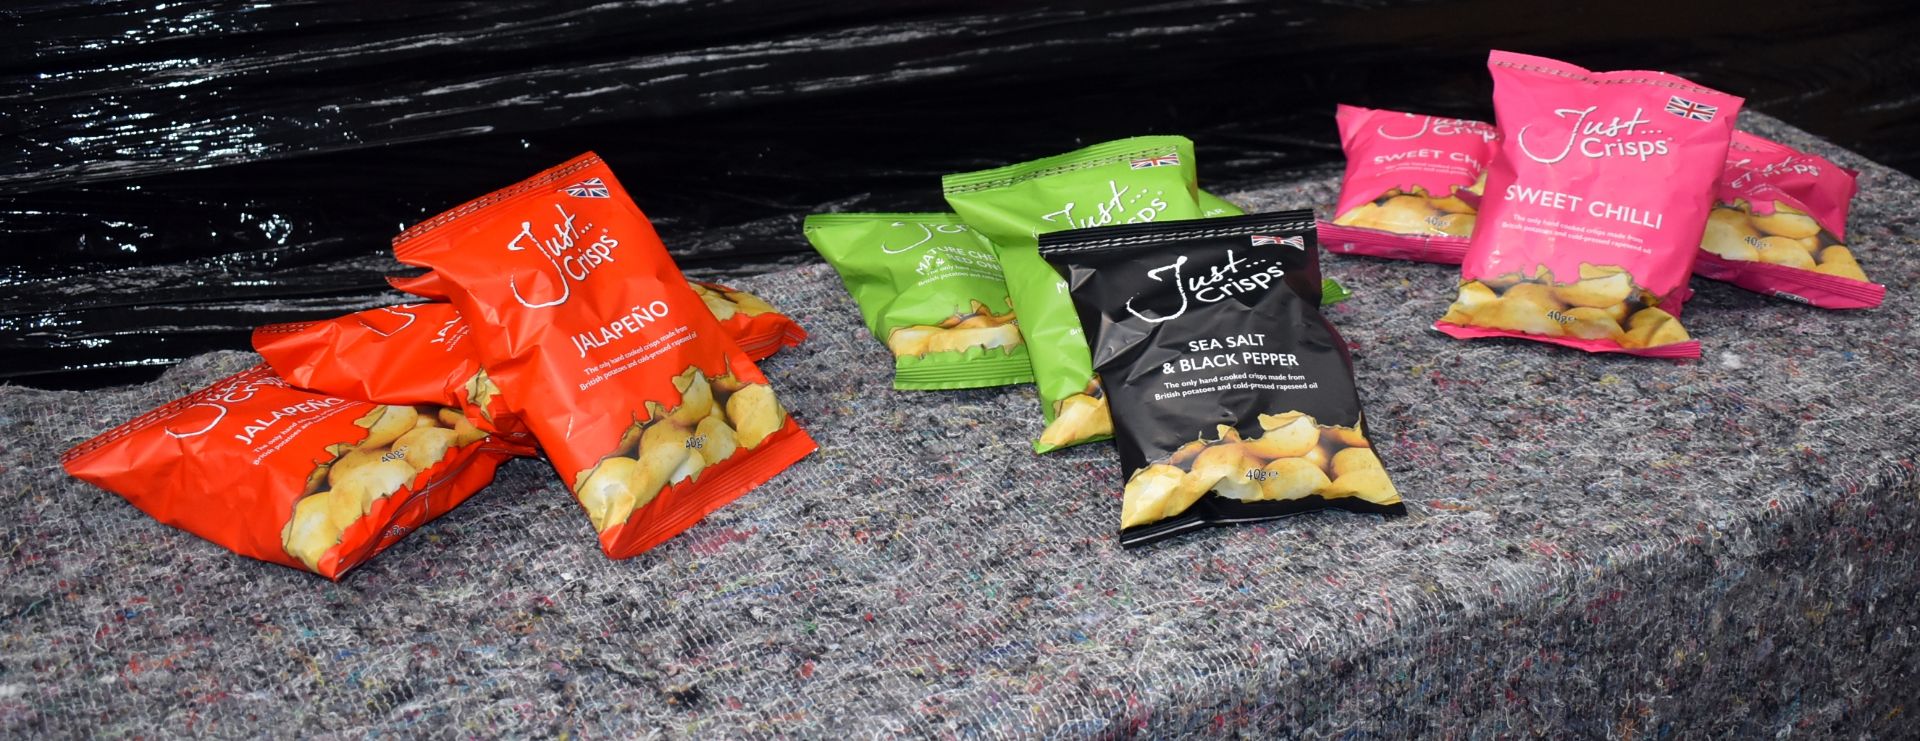 36 x Assorted Consumable Food Products Including Bags of JUST Flavoured Crisps- Ref: TCH405 - - Image 20 of 23